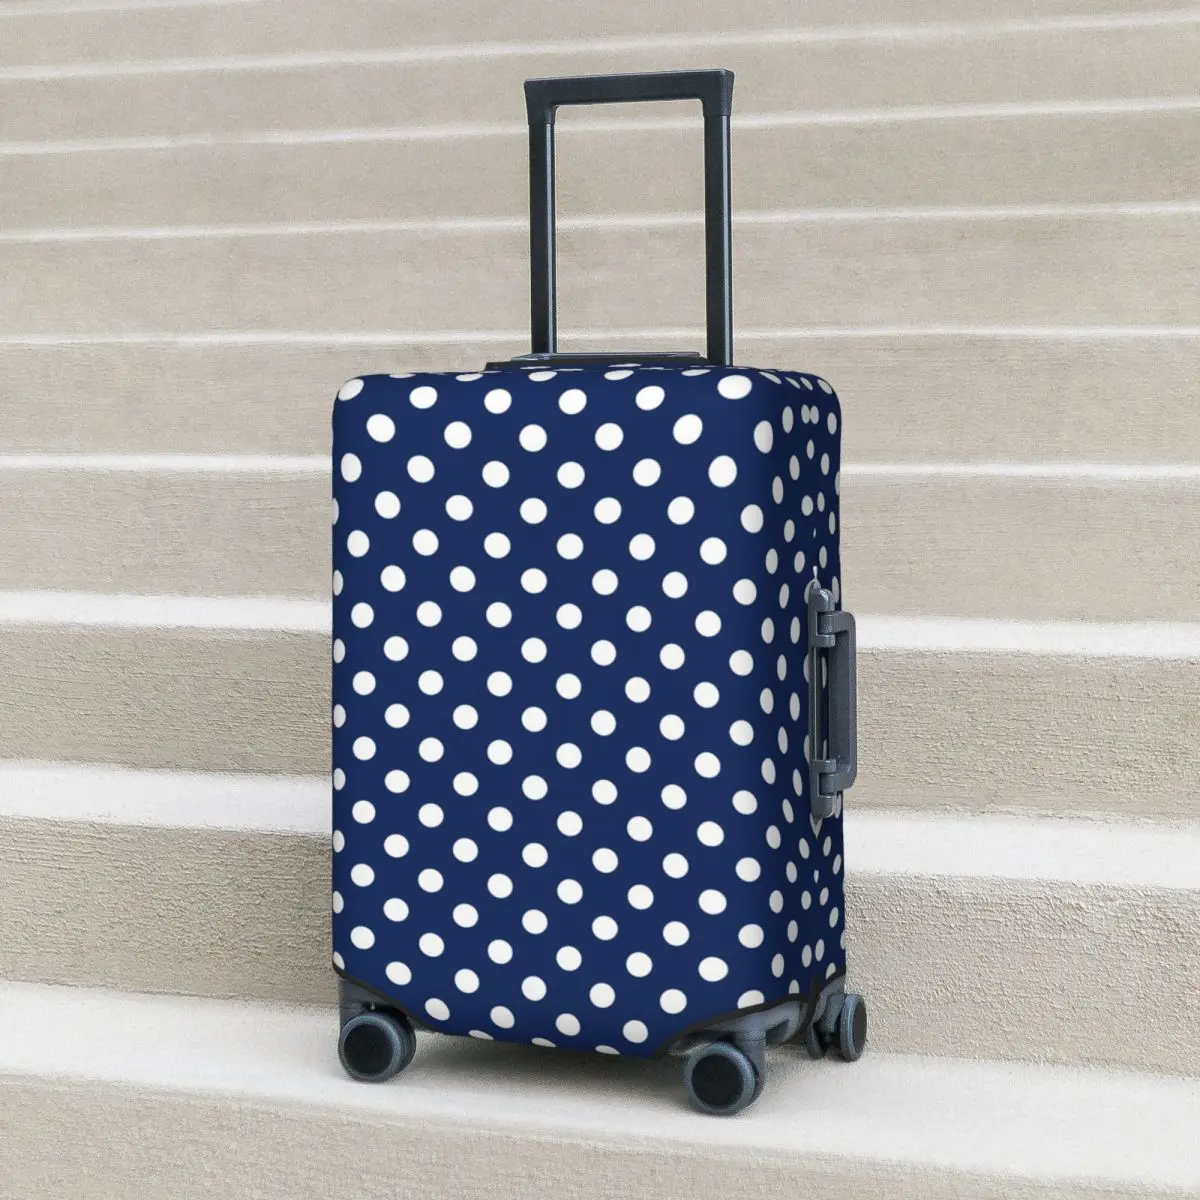 

Polka Dots Suitcase Cover Navy Blue and White Cruise Trip Protector Vacation Strectch Luggage Accesories